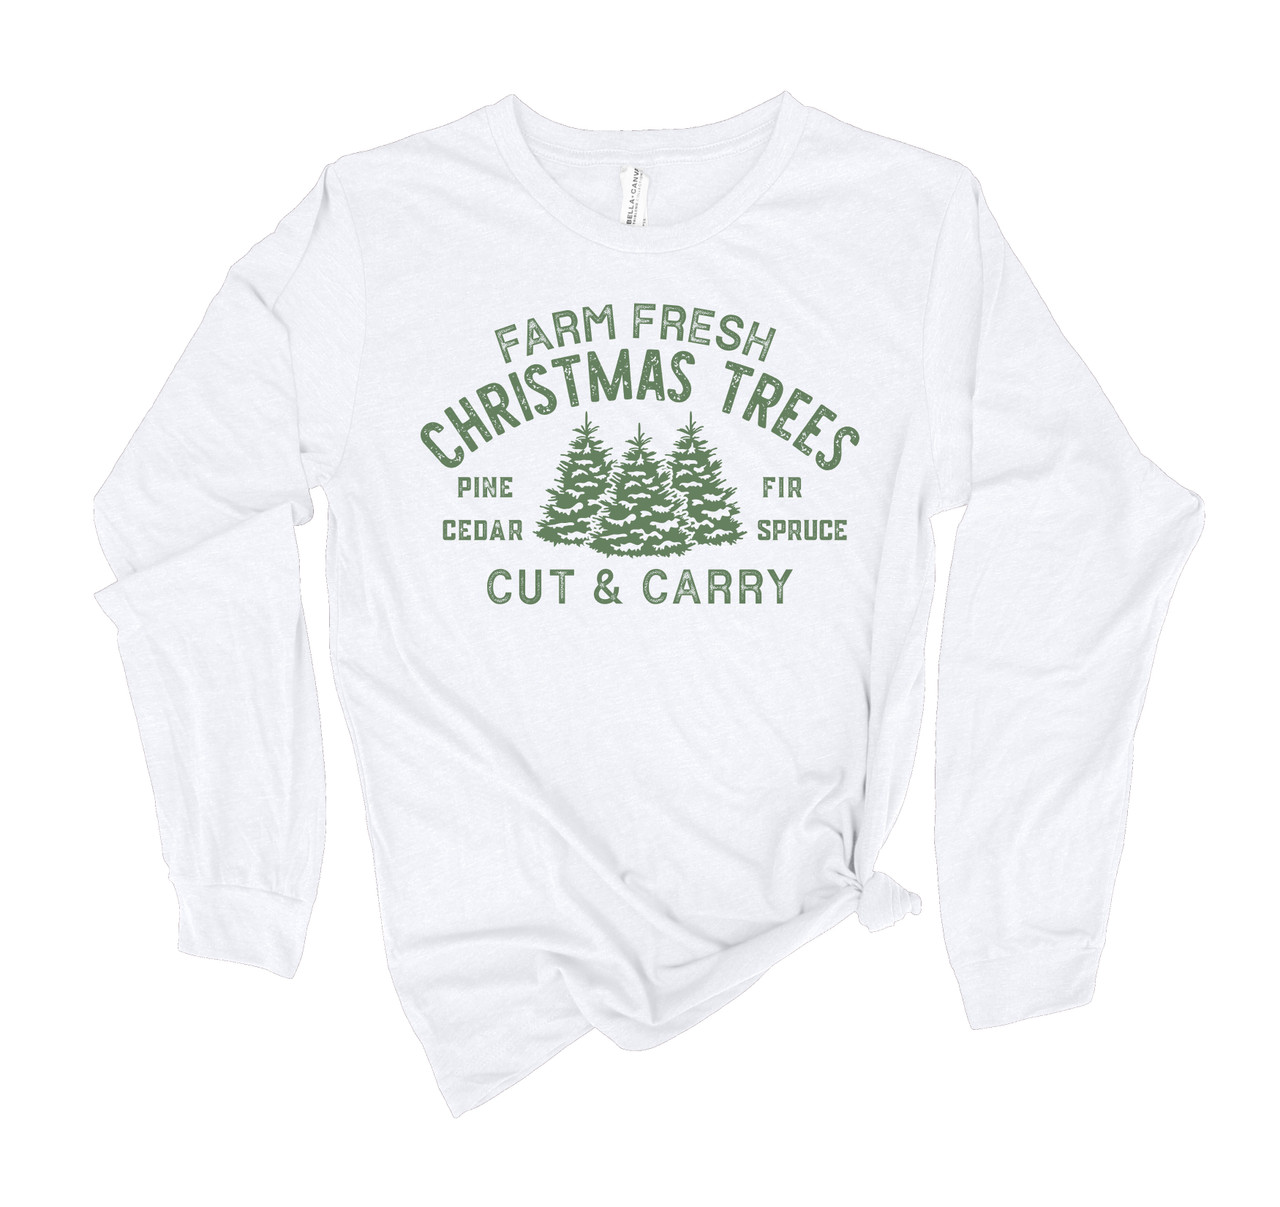 mundstykke Intens Vaccinere Farm Fresh Christmas Tree Cut and Carry Holiday Shirt Ladies Womens Long  Sleeve T-shirt Christmas Graphic Tee - Trenz Shirt Company